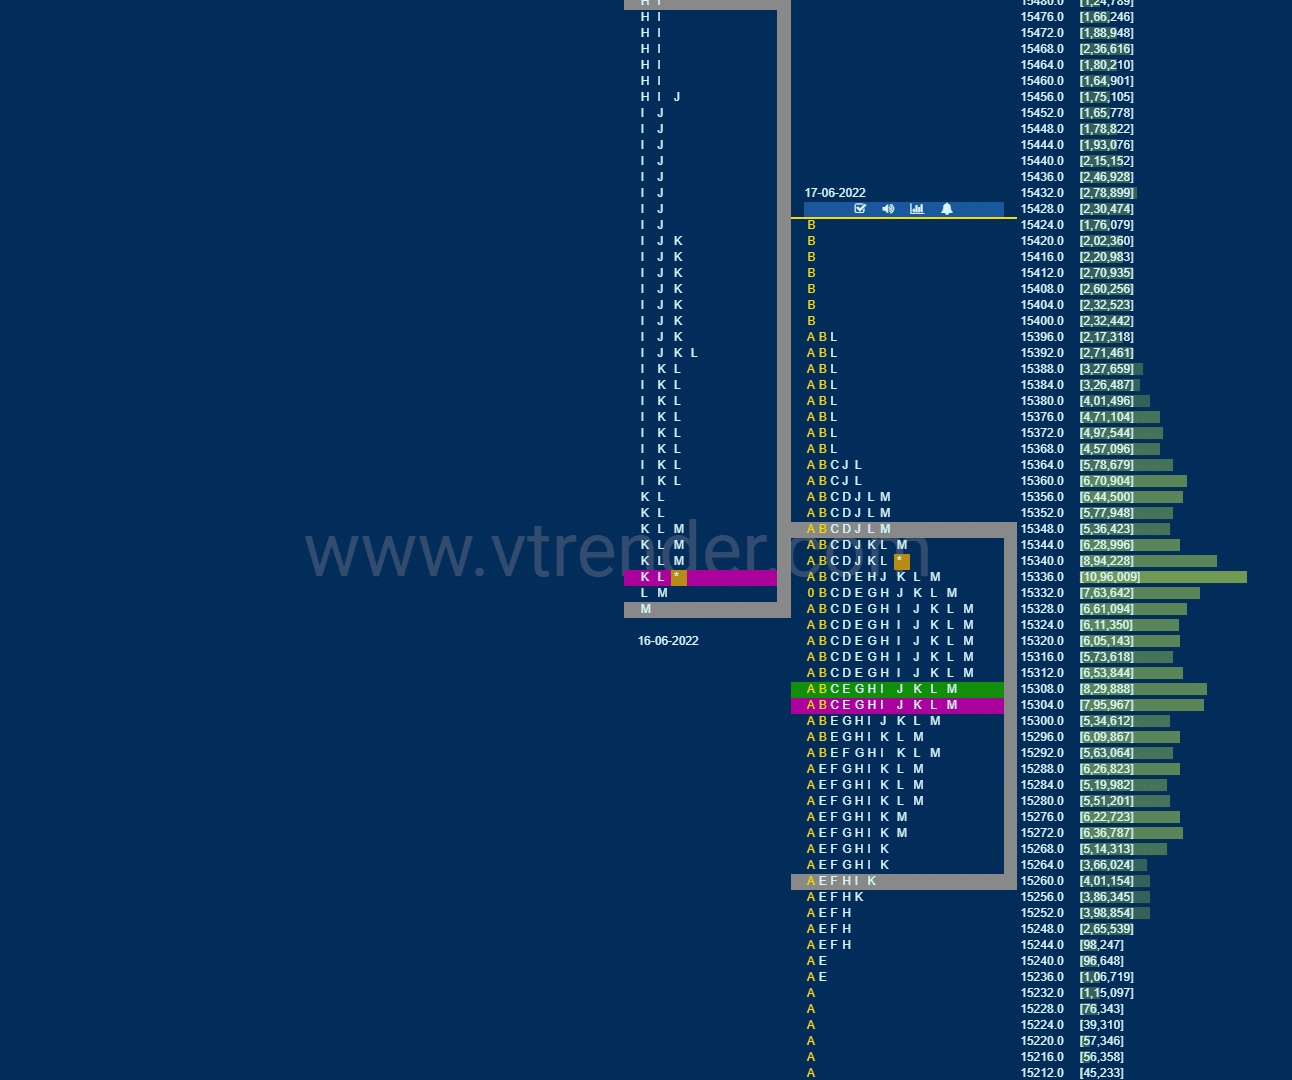 Nf 13 Market Profile Analysis Dated 17Th Jun 2022 Banknifty Futures, Charts, Day Trading, Intraday Trading, Intraday Trading Strategies, Market Profile, Market Profile Trading Strategies, Nifty Futures, Order Flow Analysis, Support And Resistance, Technical Analysis, Trading Strategies, Volume Profile Trading